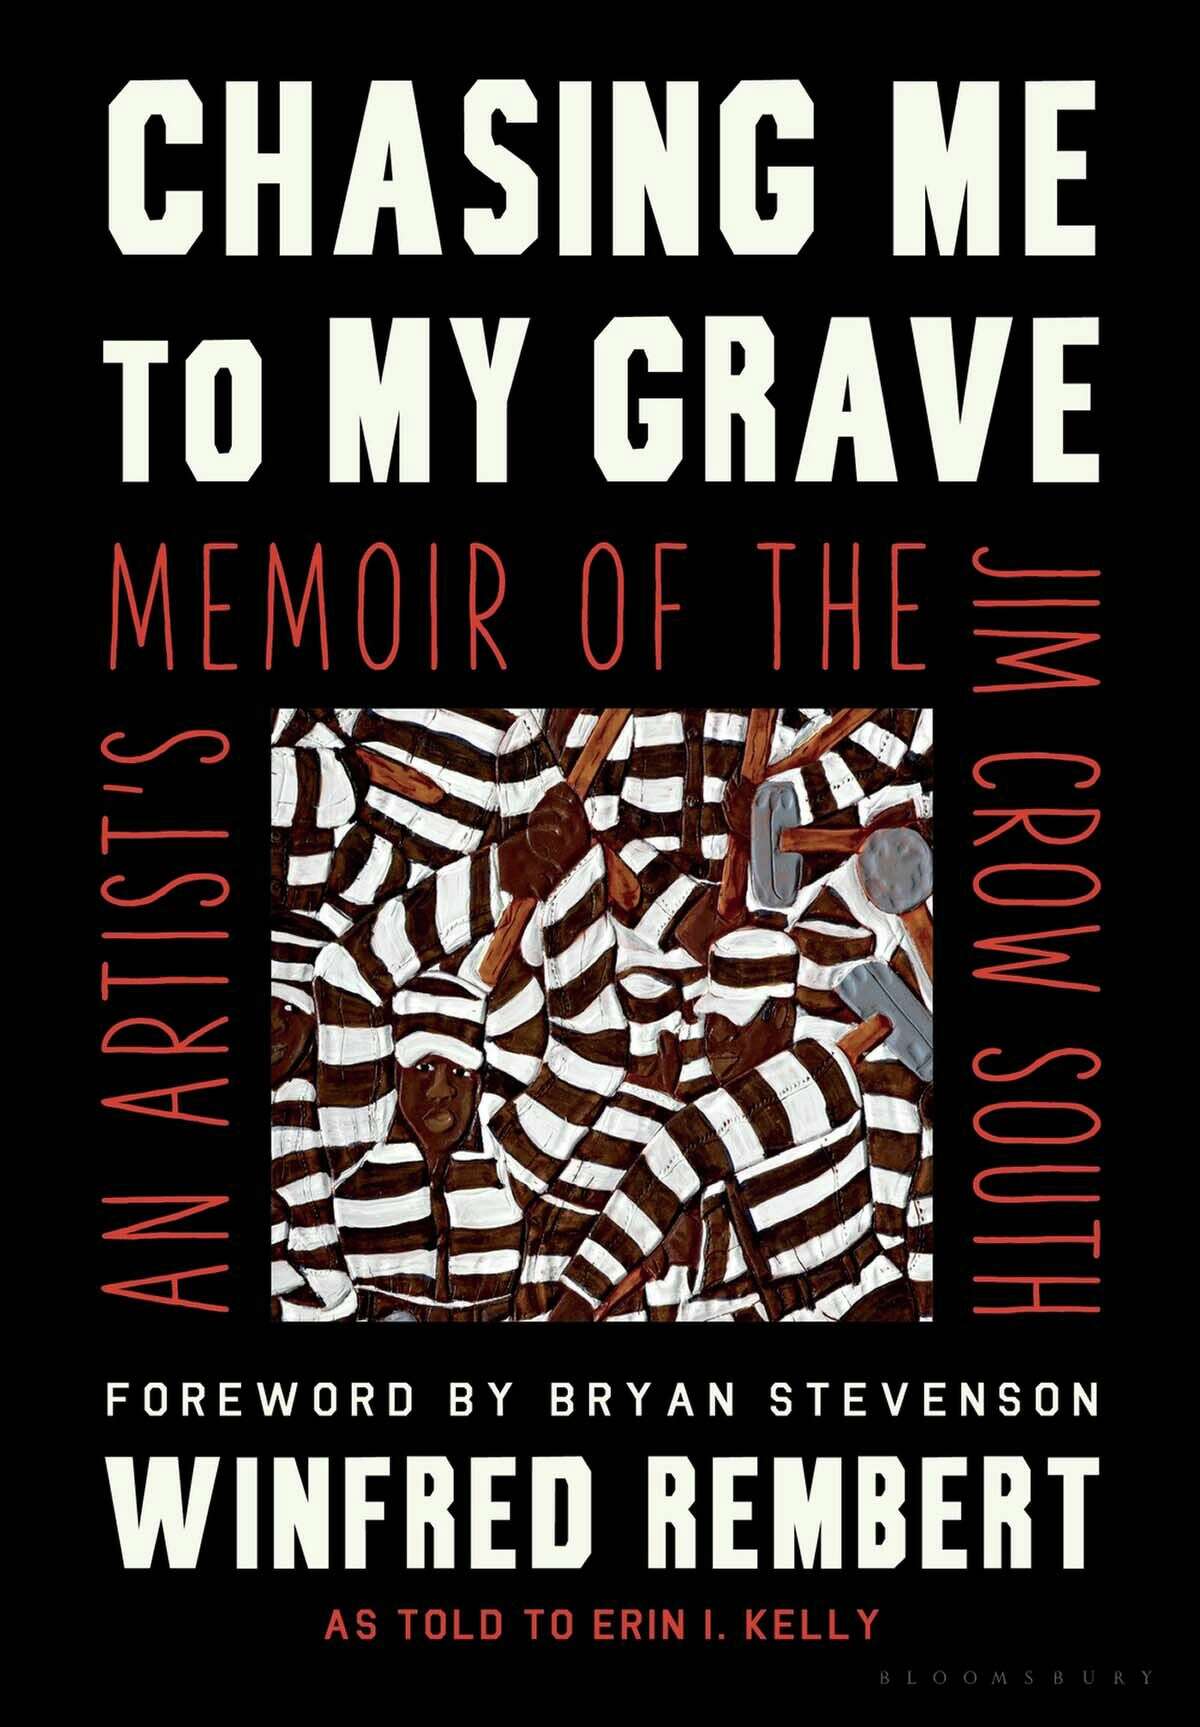 Winfred Rembert's memoir "Chasing Me to My Grave: An Artist's Memoir of the Jim Crow South" publishes Sept. 7.?